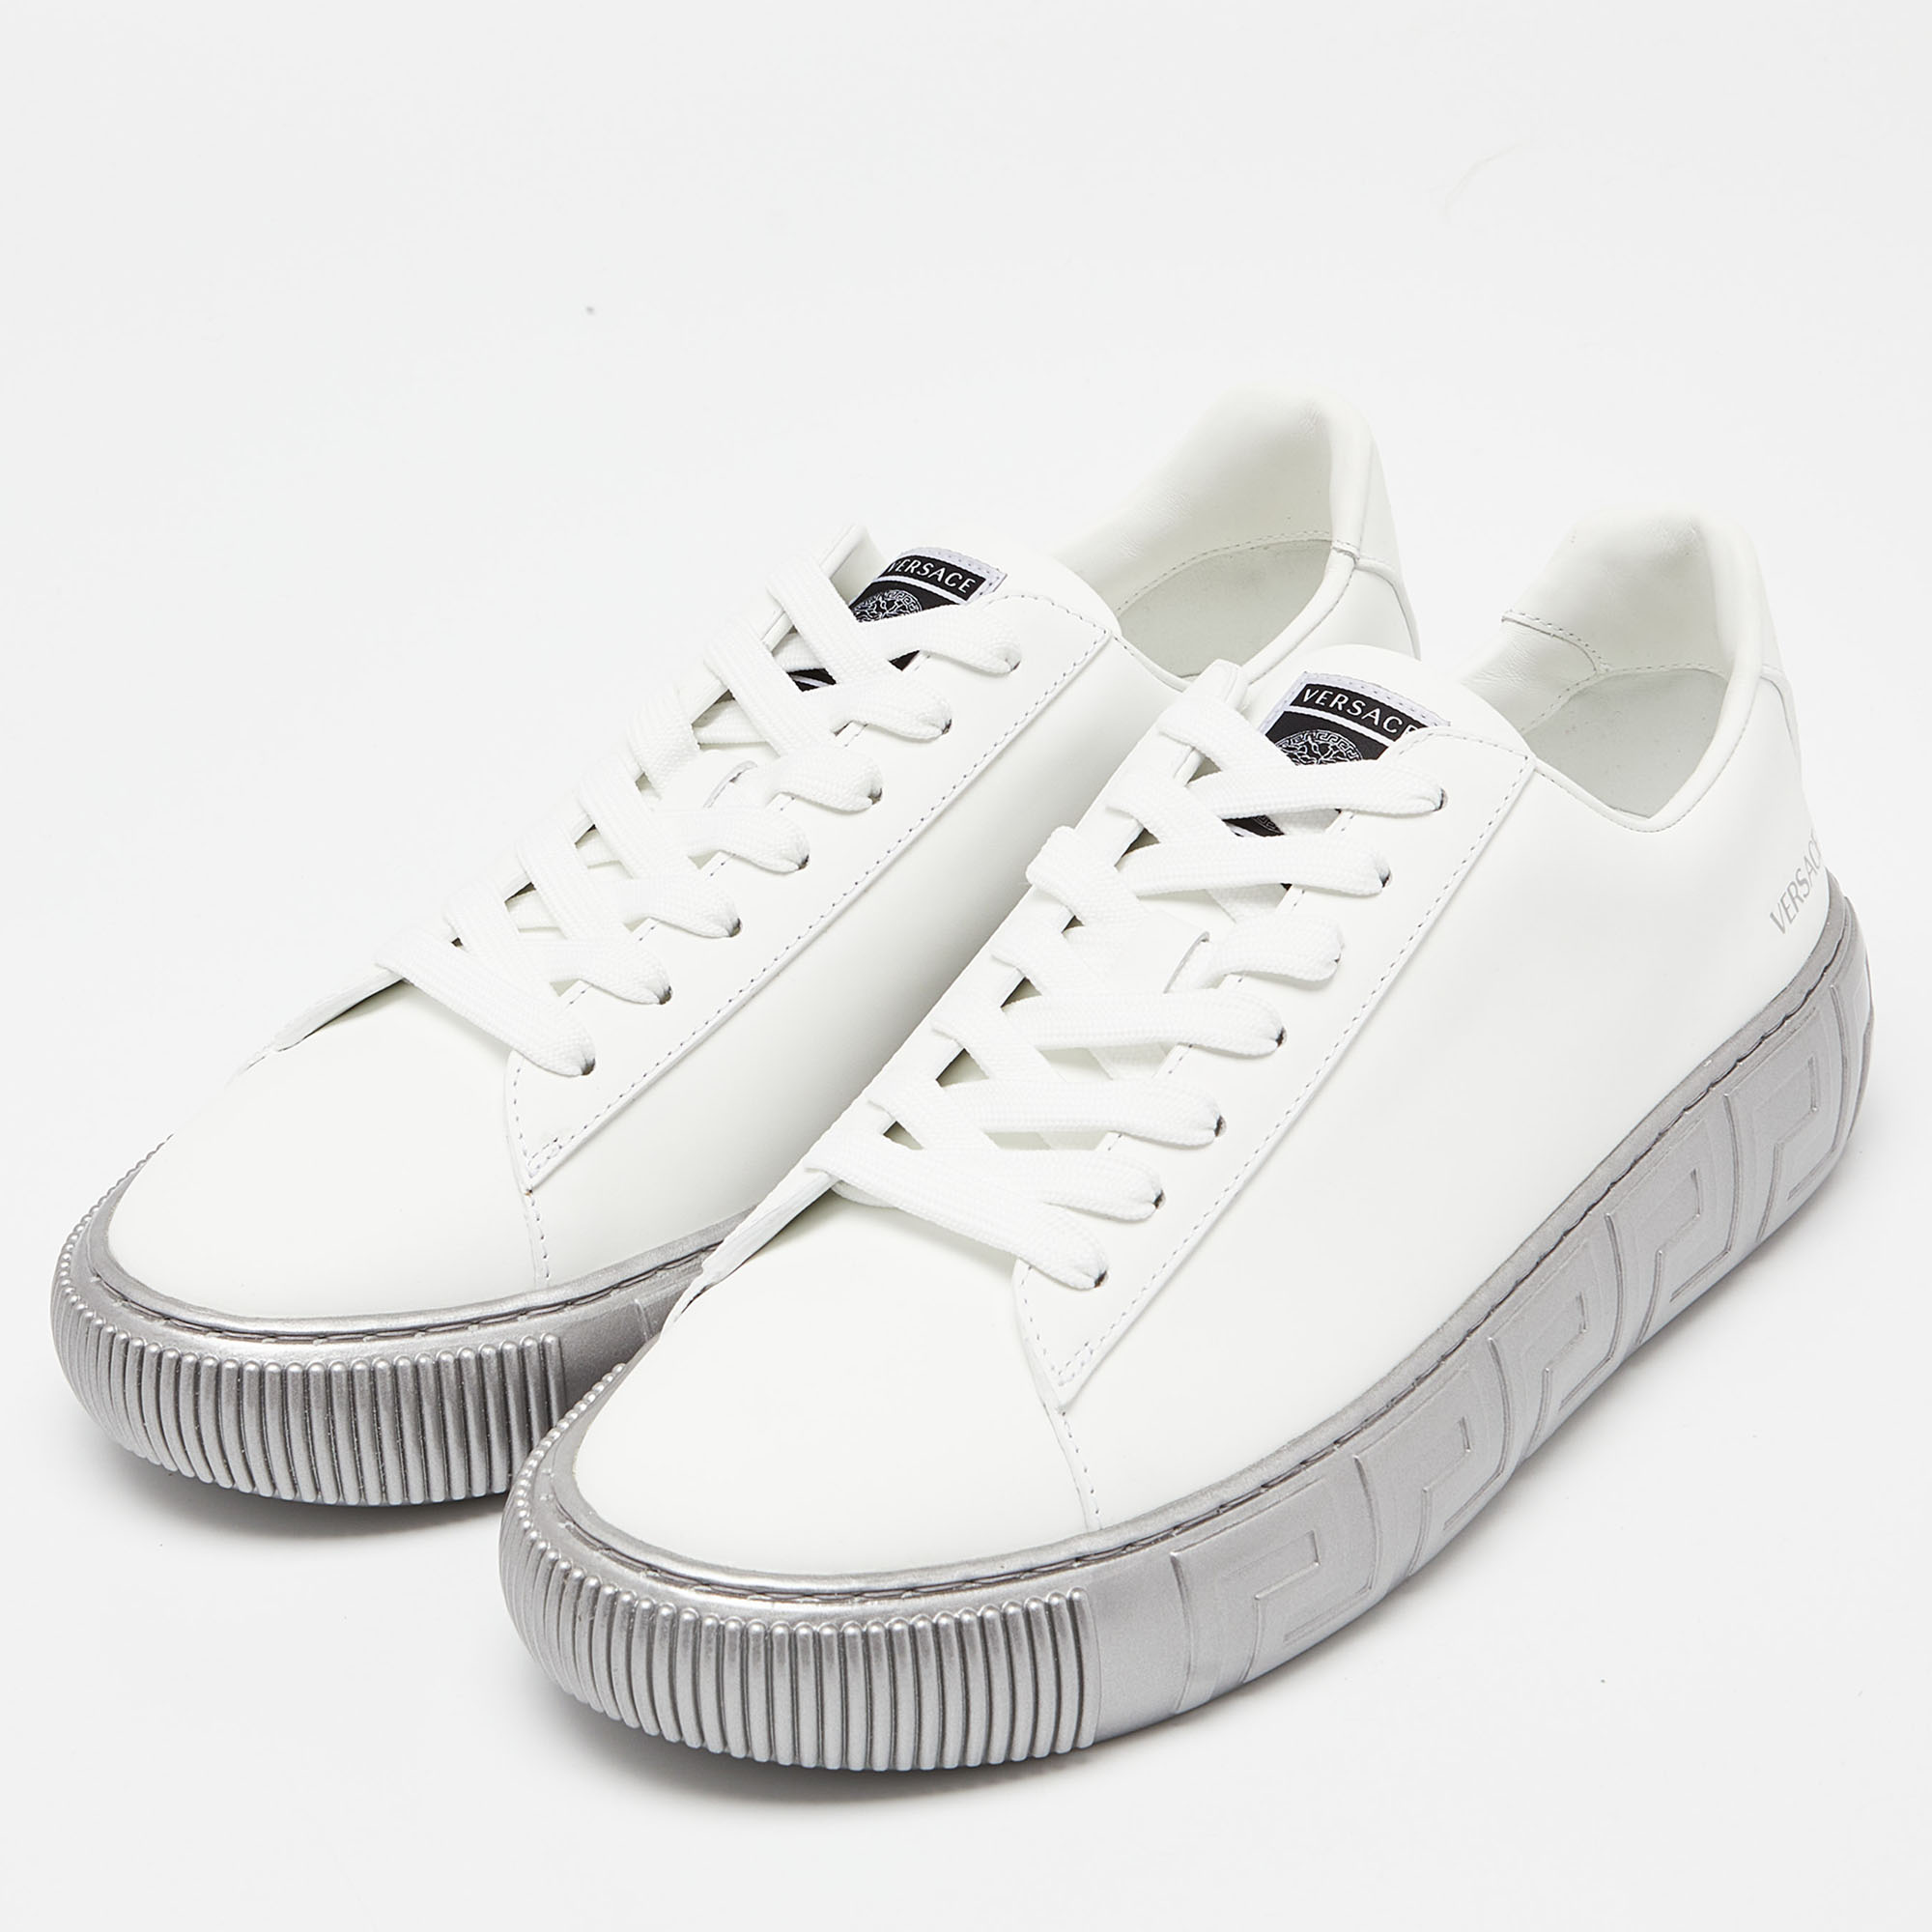 

Versace White/Silver Leather Greca Sneakers Size